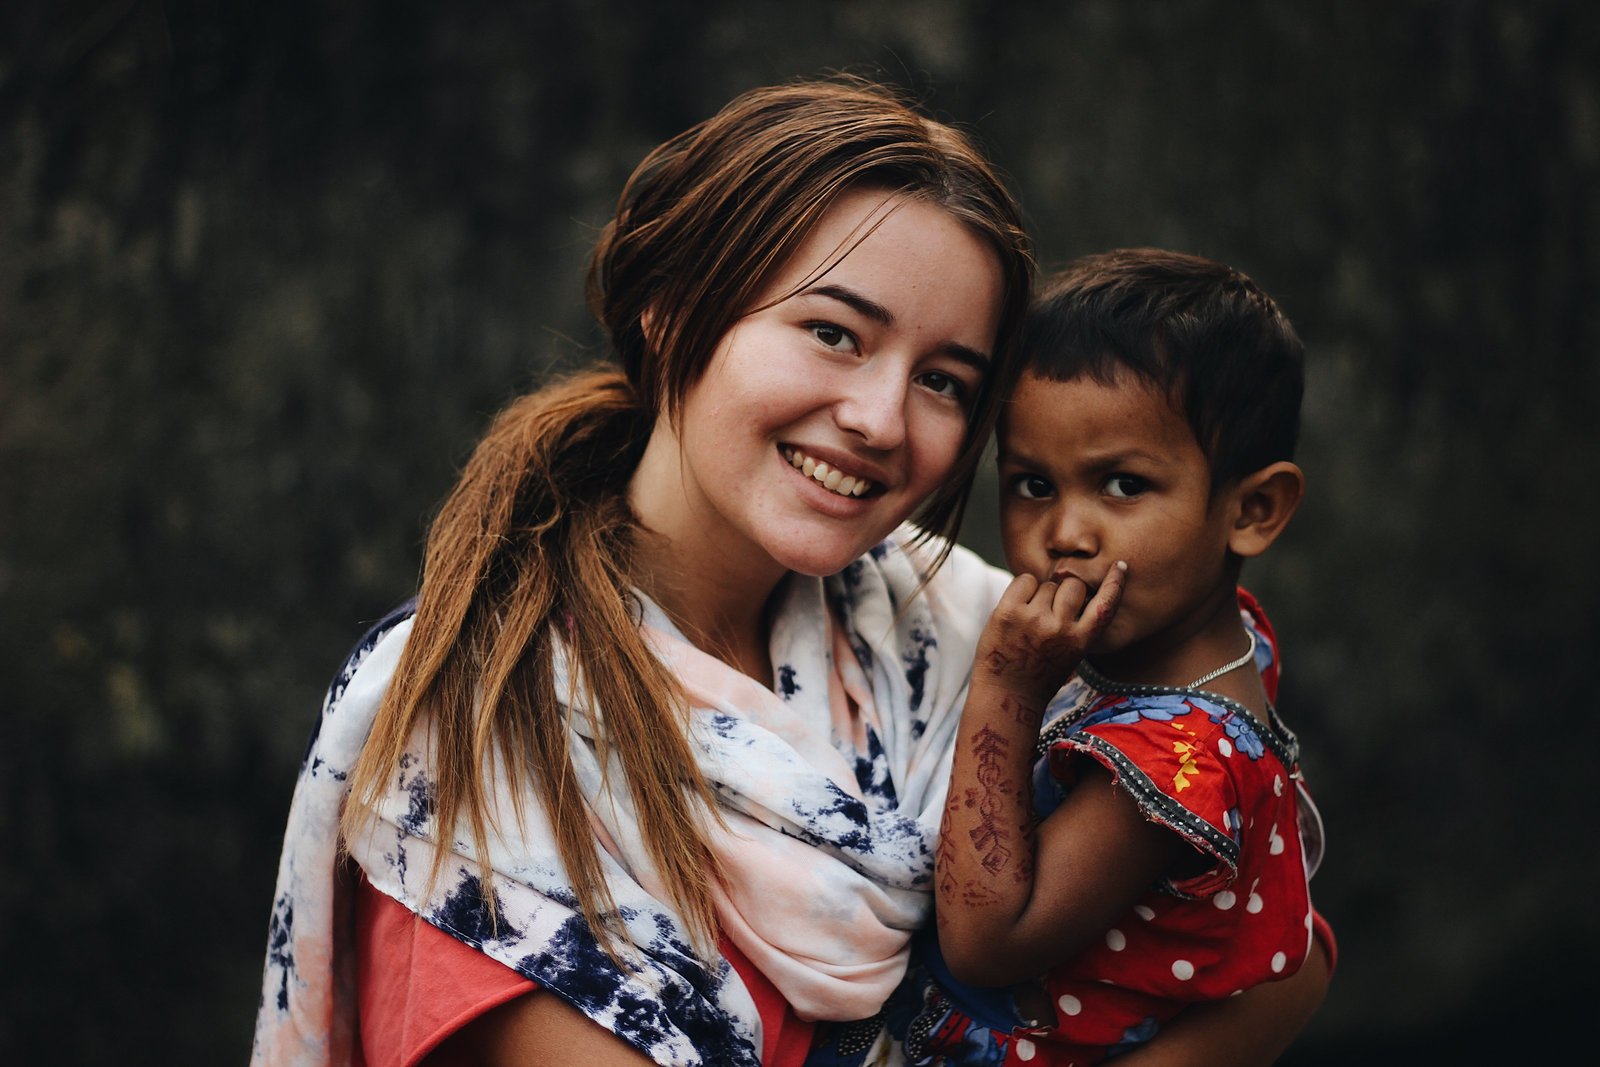 liv hettinga photography doing missions work in India